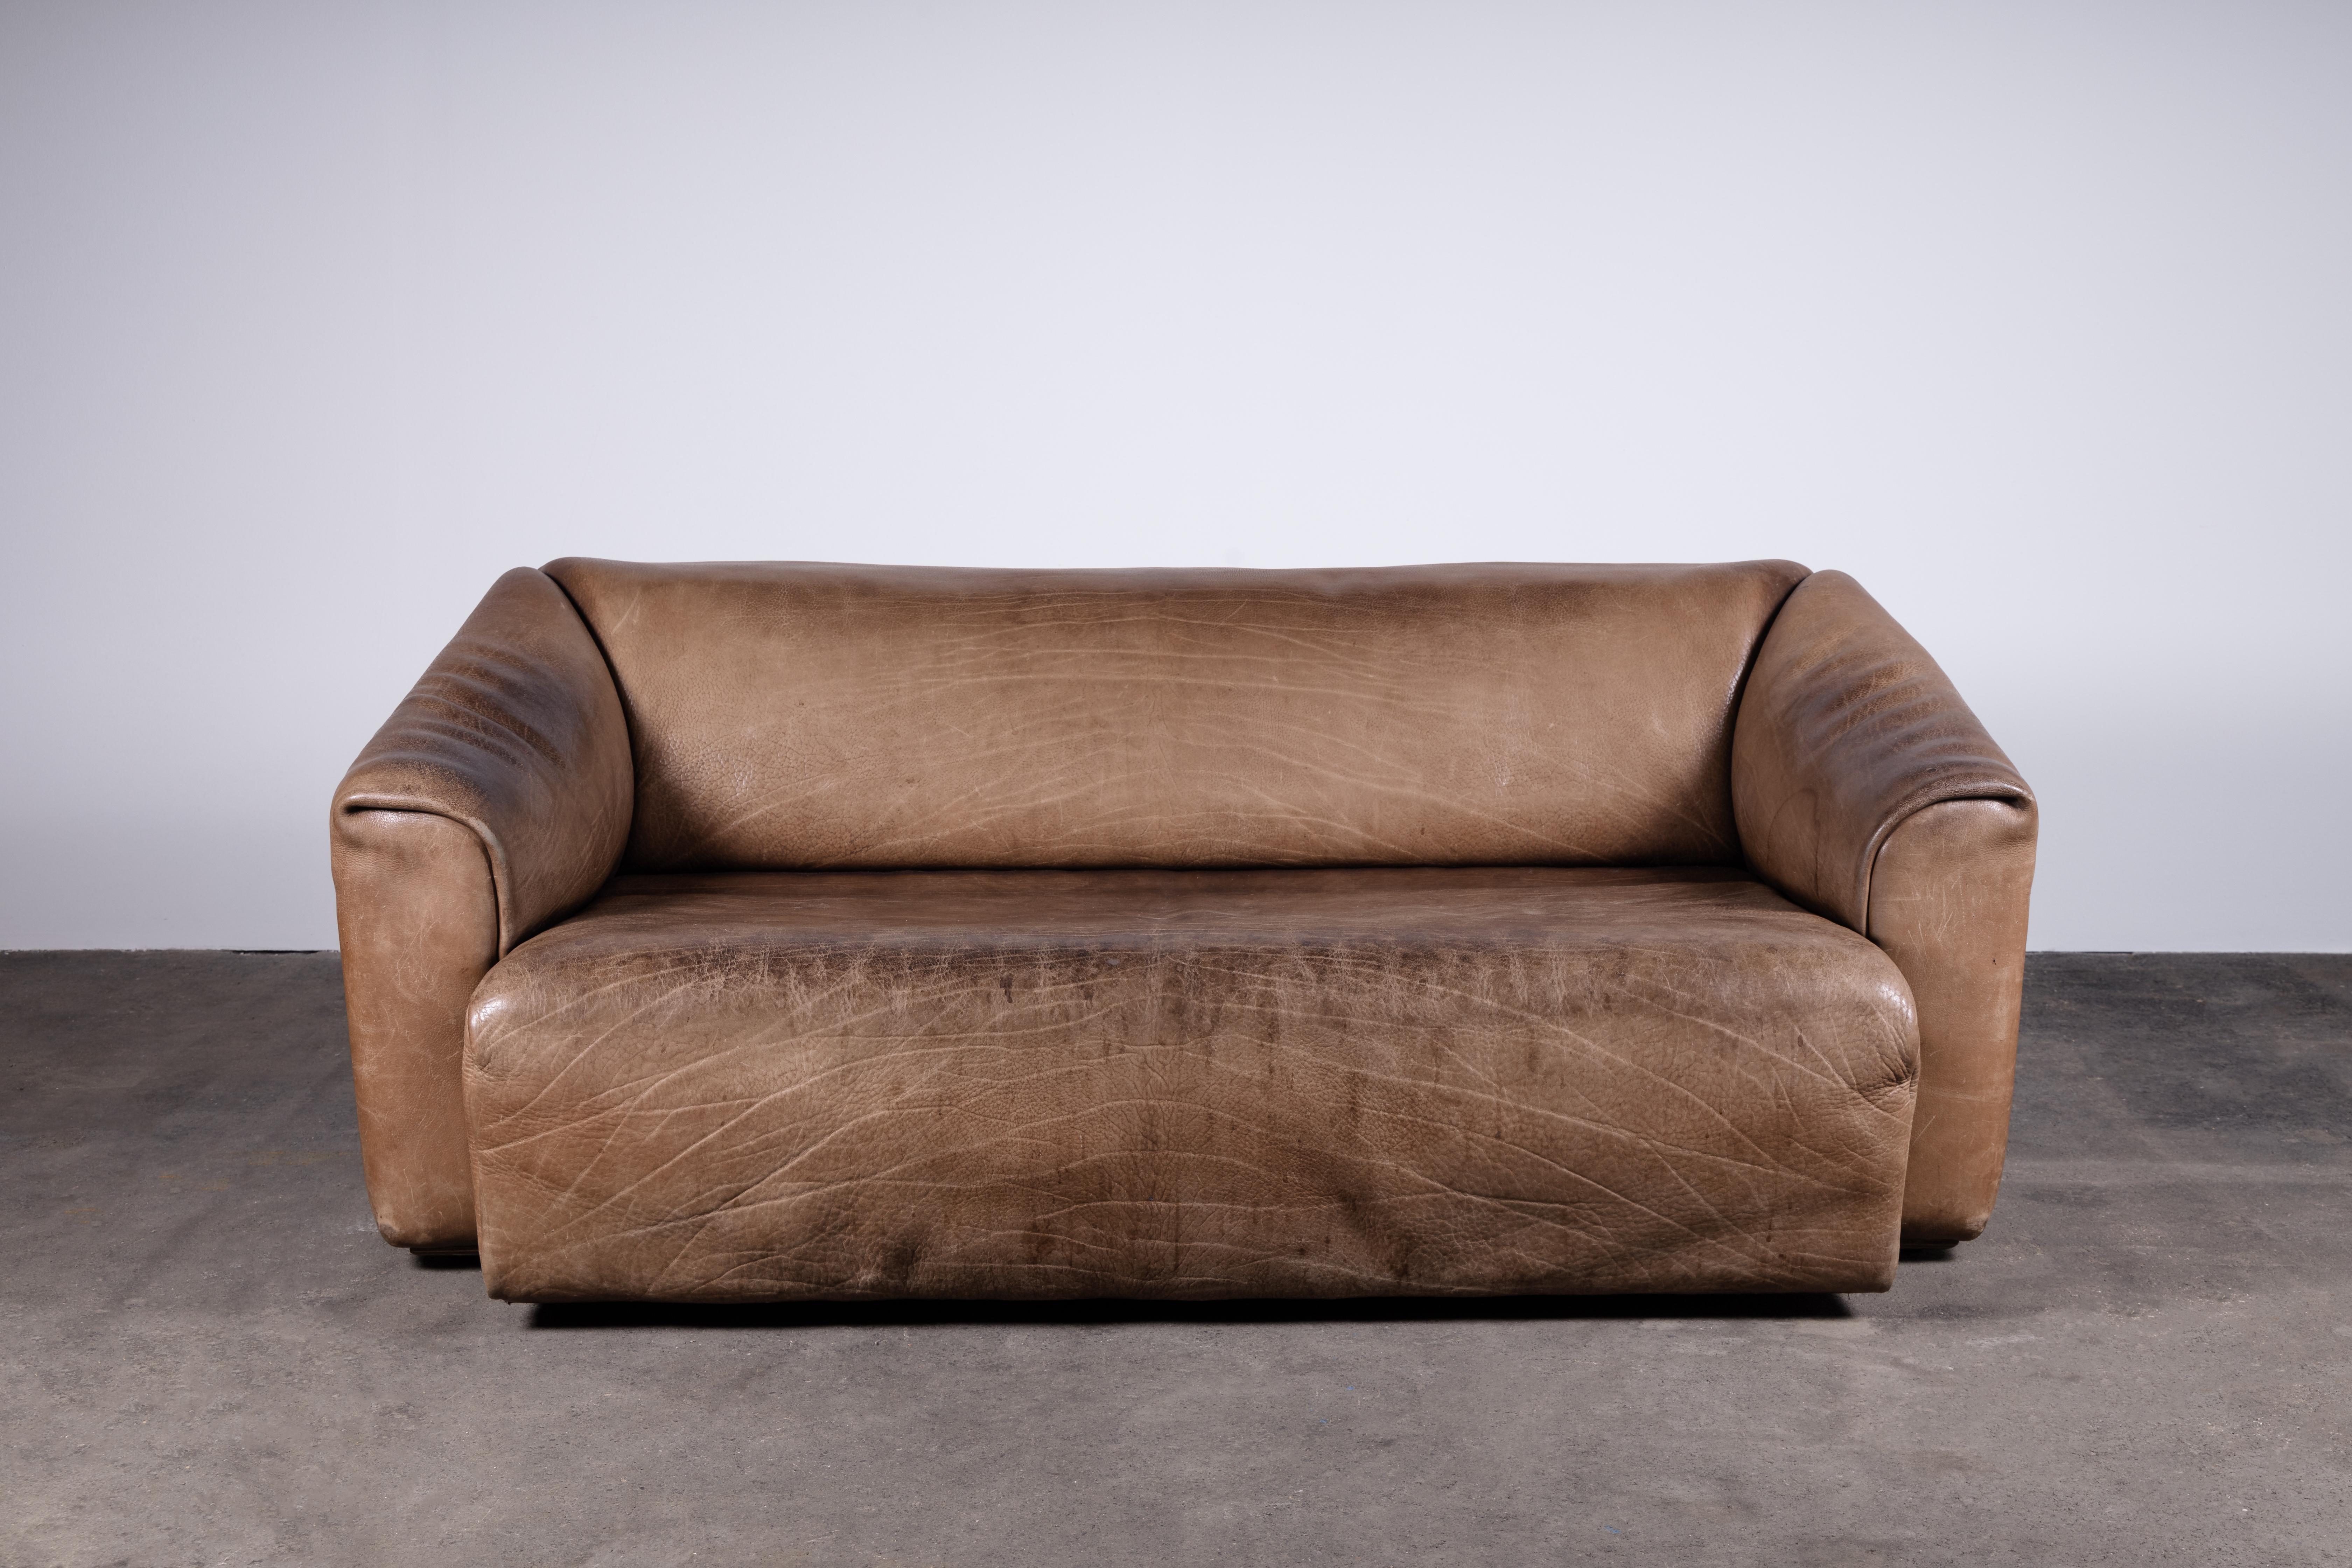 Iconic Mid-Century Modern Swiss extendable sofa in largest 3-seat variant. The De Sede DS-47.

The wide extendable seat is covered in an enormous single hide of raw, uncoated/open pore buffalo. The entire back side of the sofa wrapping around to the